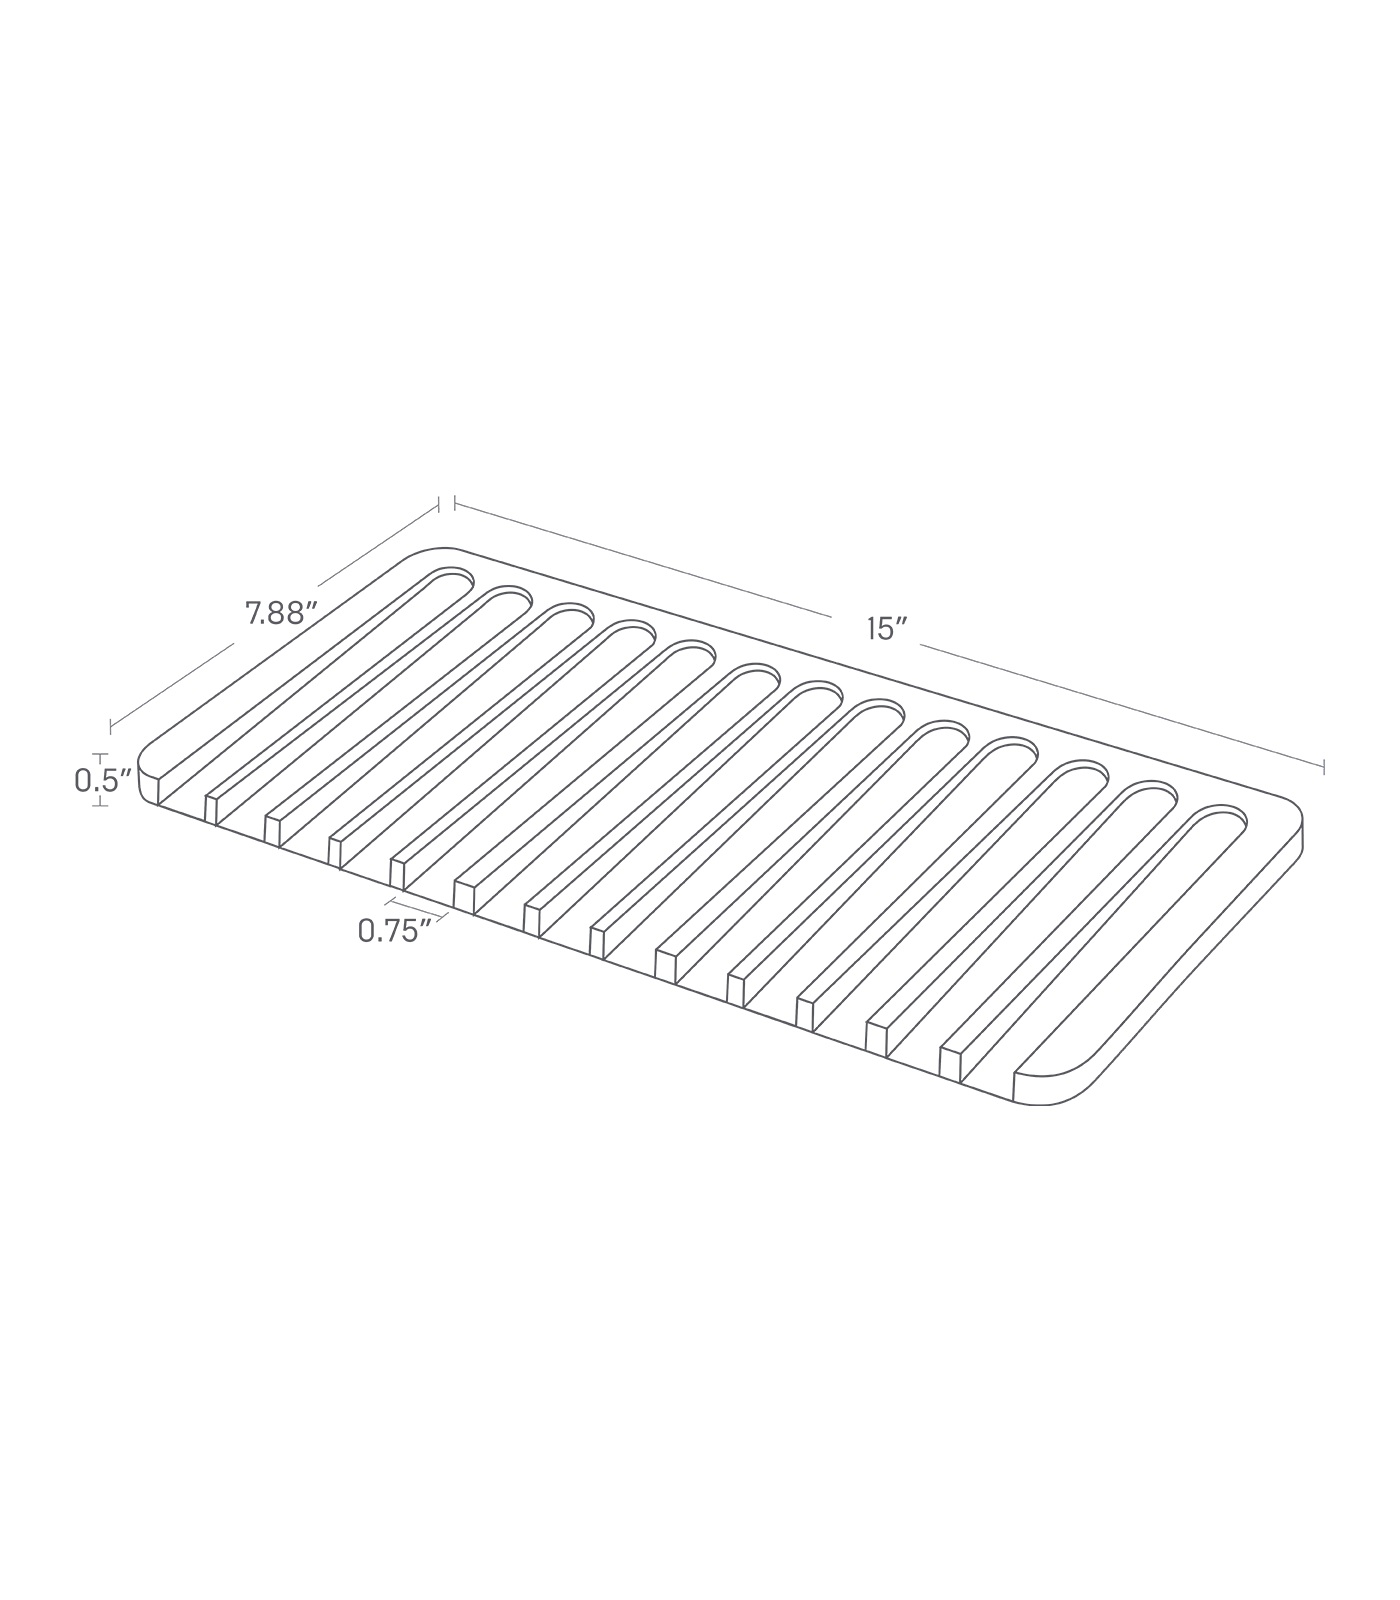 Dimension image for Dish Drainer Tray on a white background including dimensions  L 7.87 x W 14.96 x H 0.47 inches